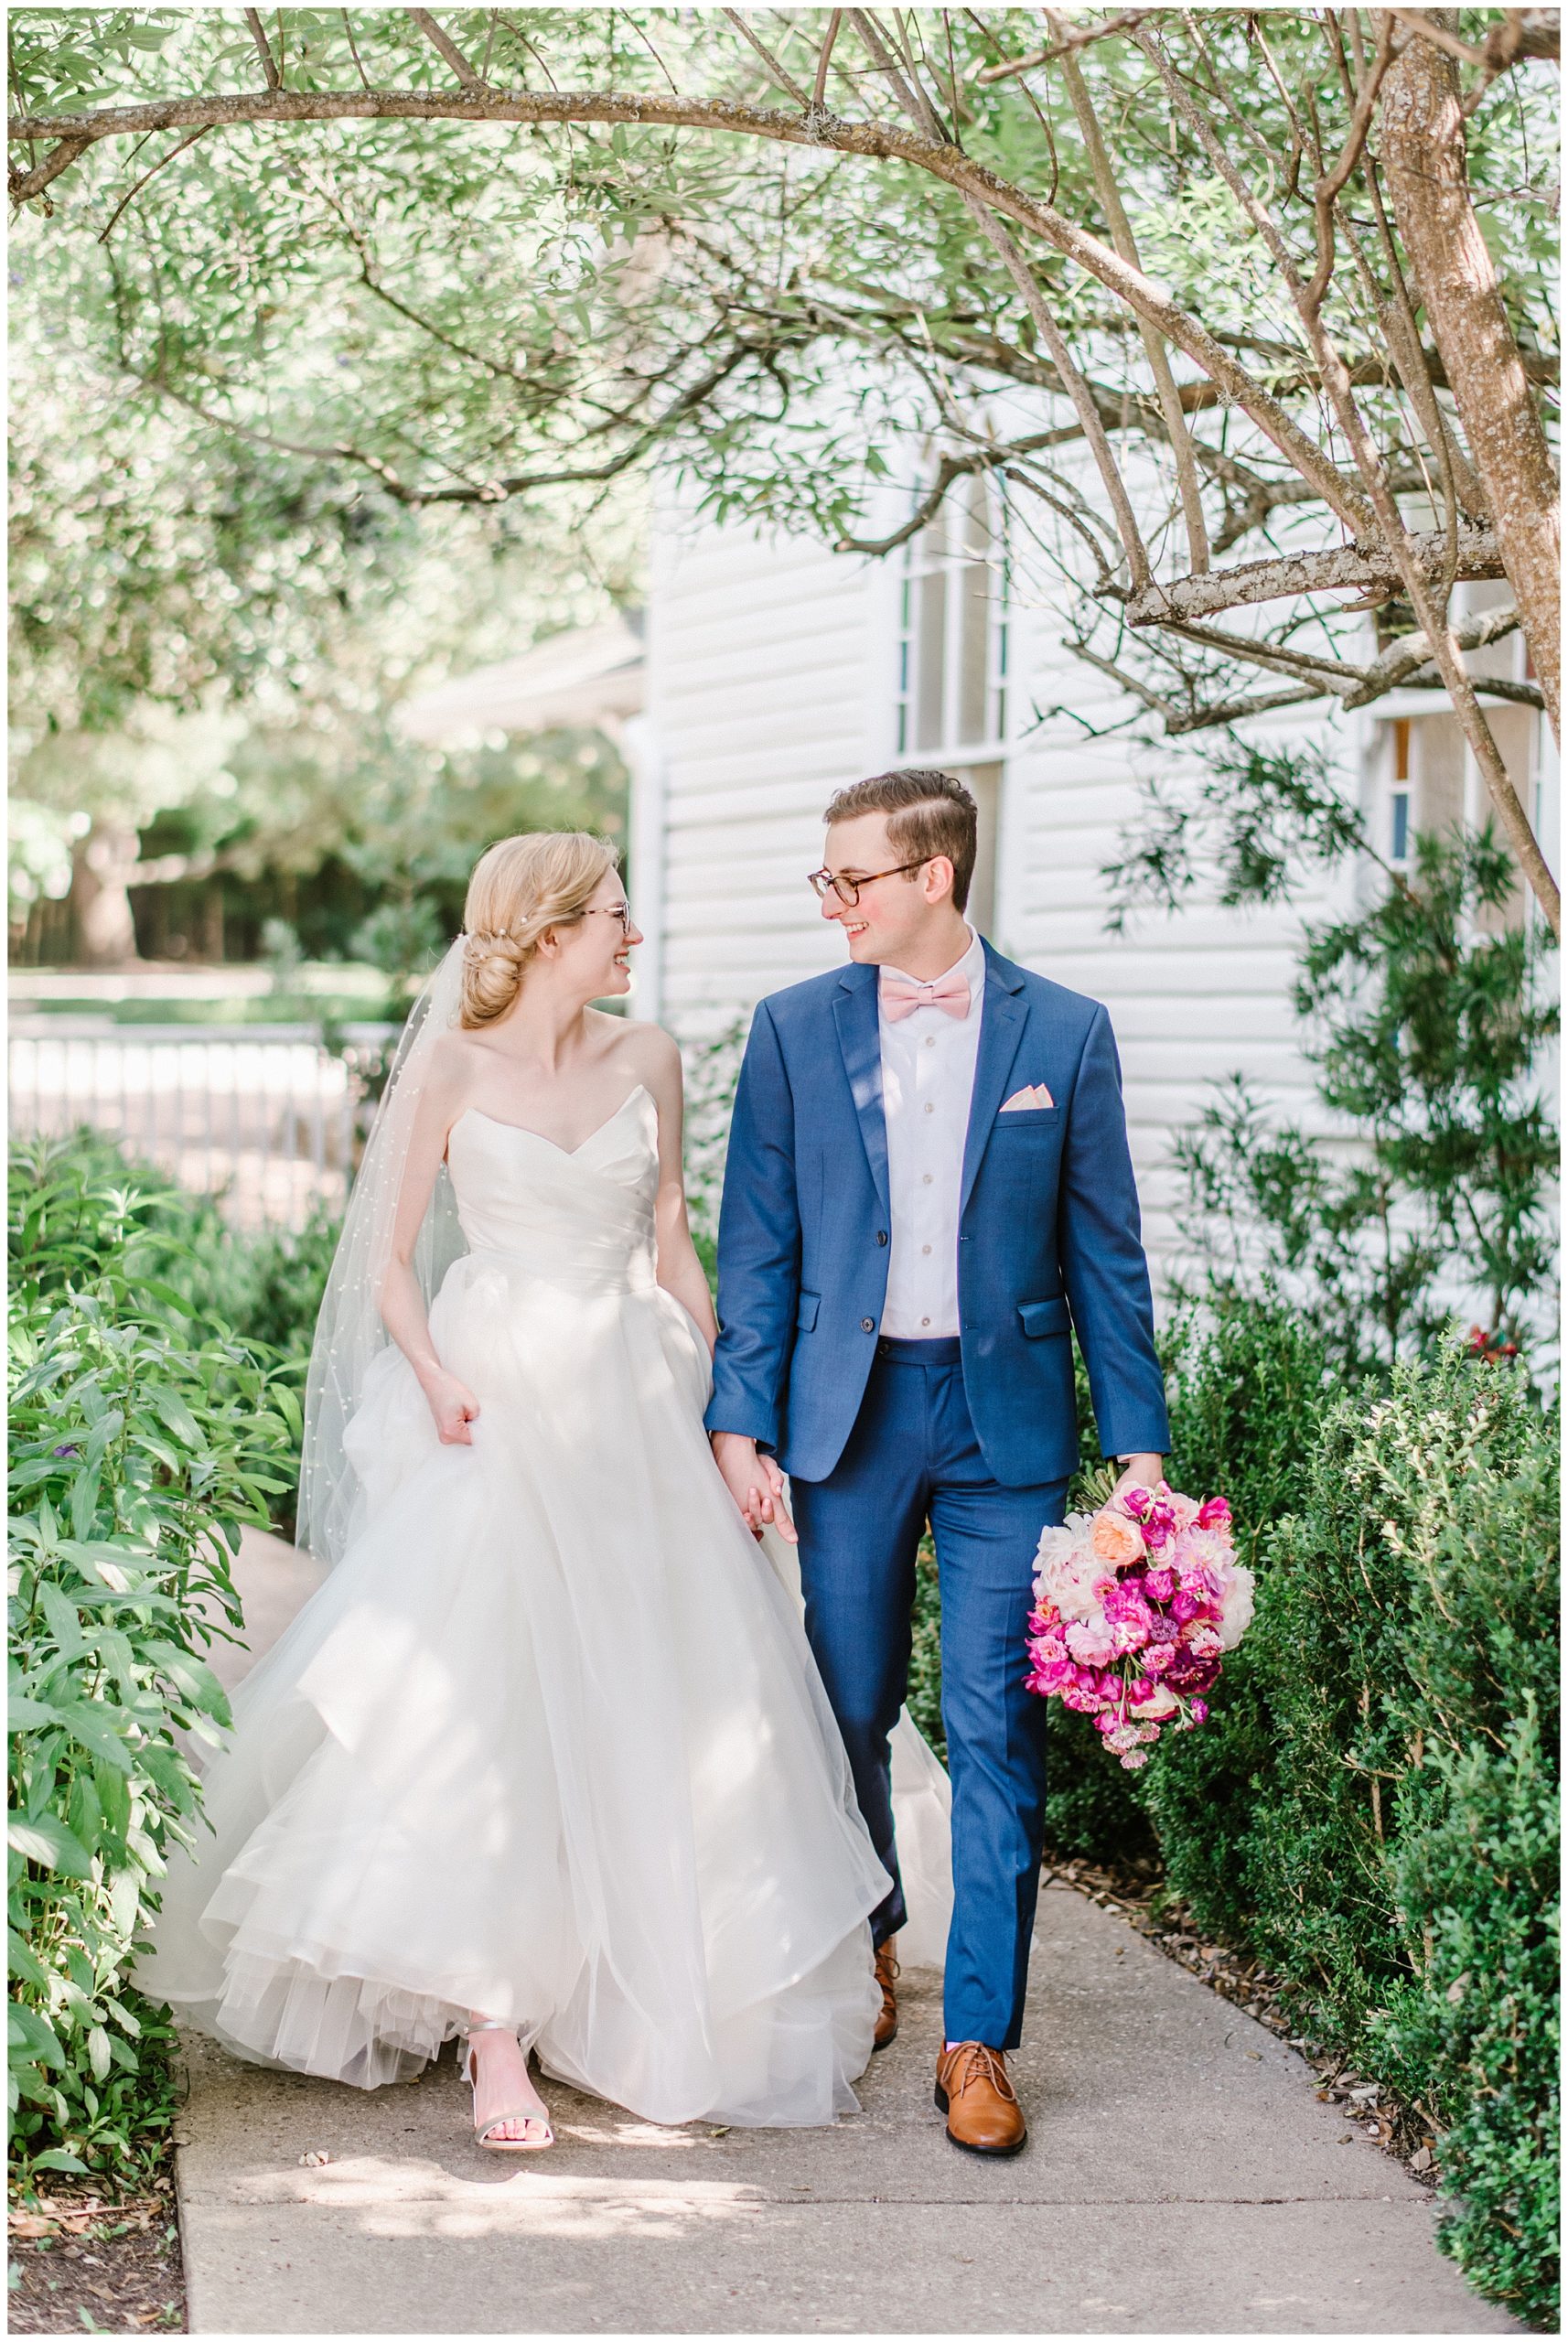 Beautiful couple wedding portraits with bright florals in soft light